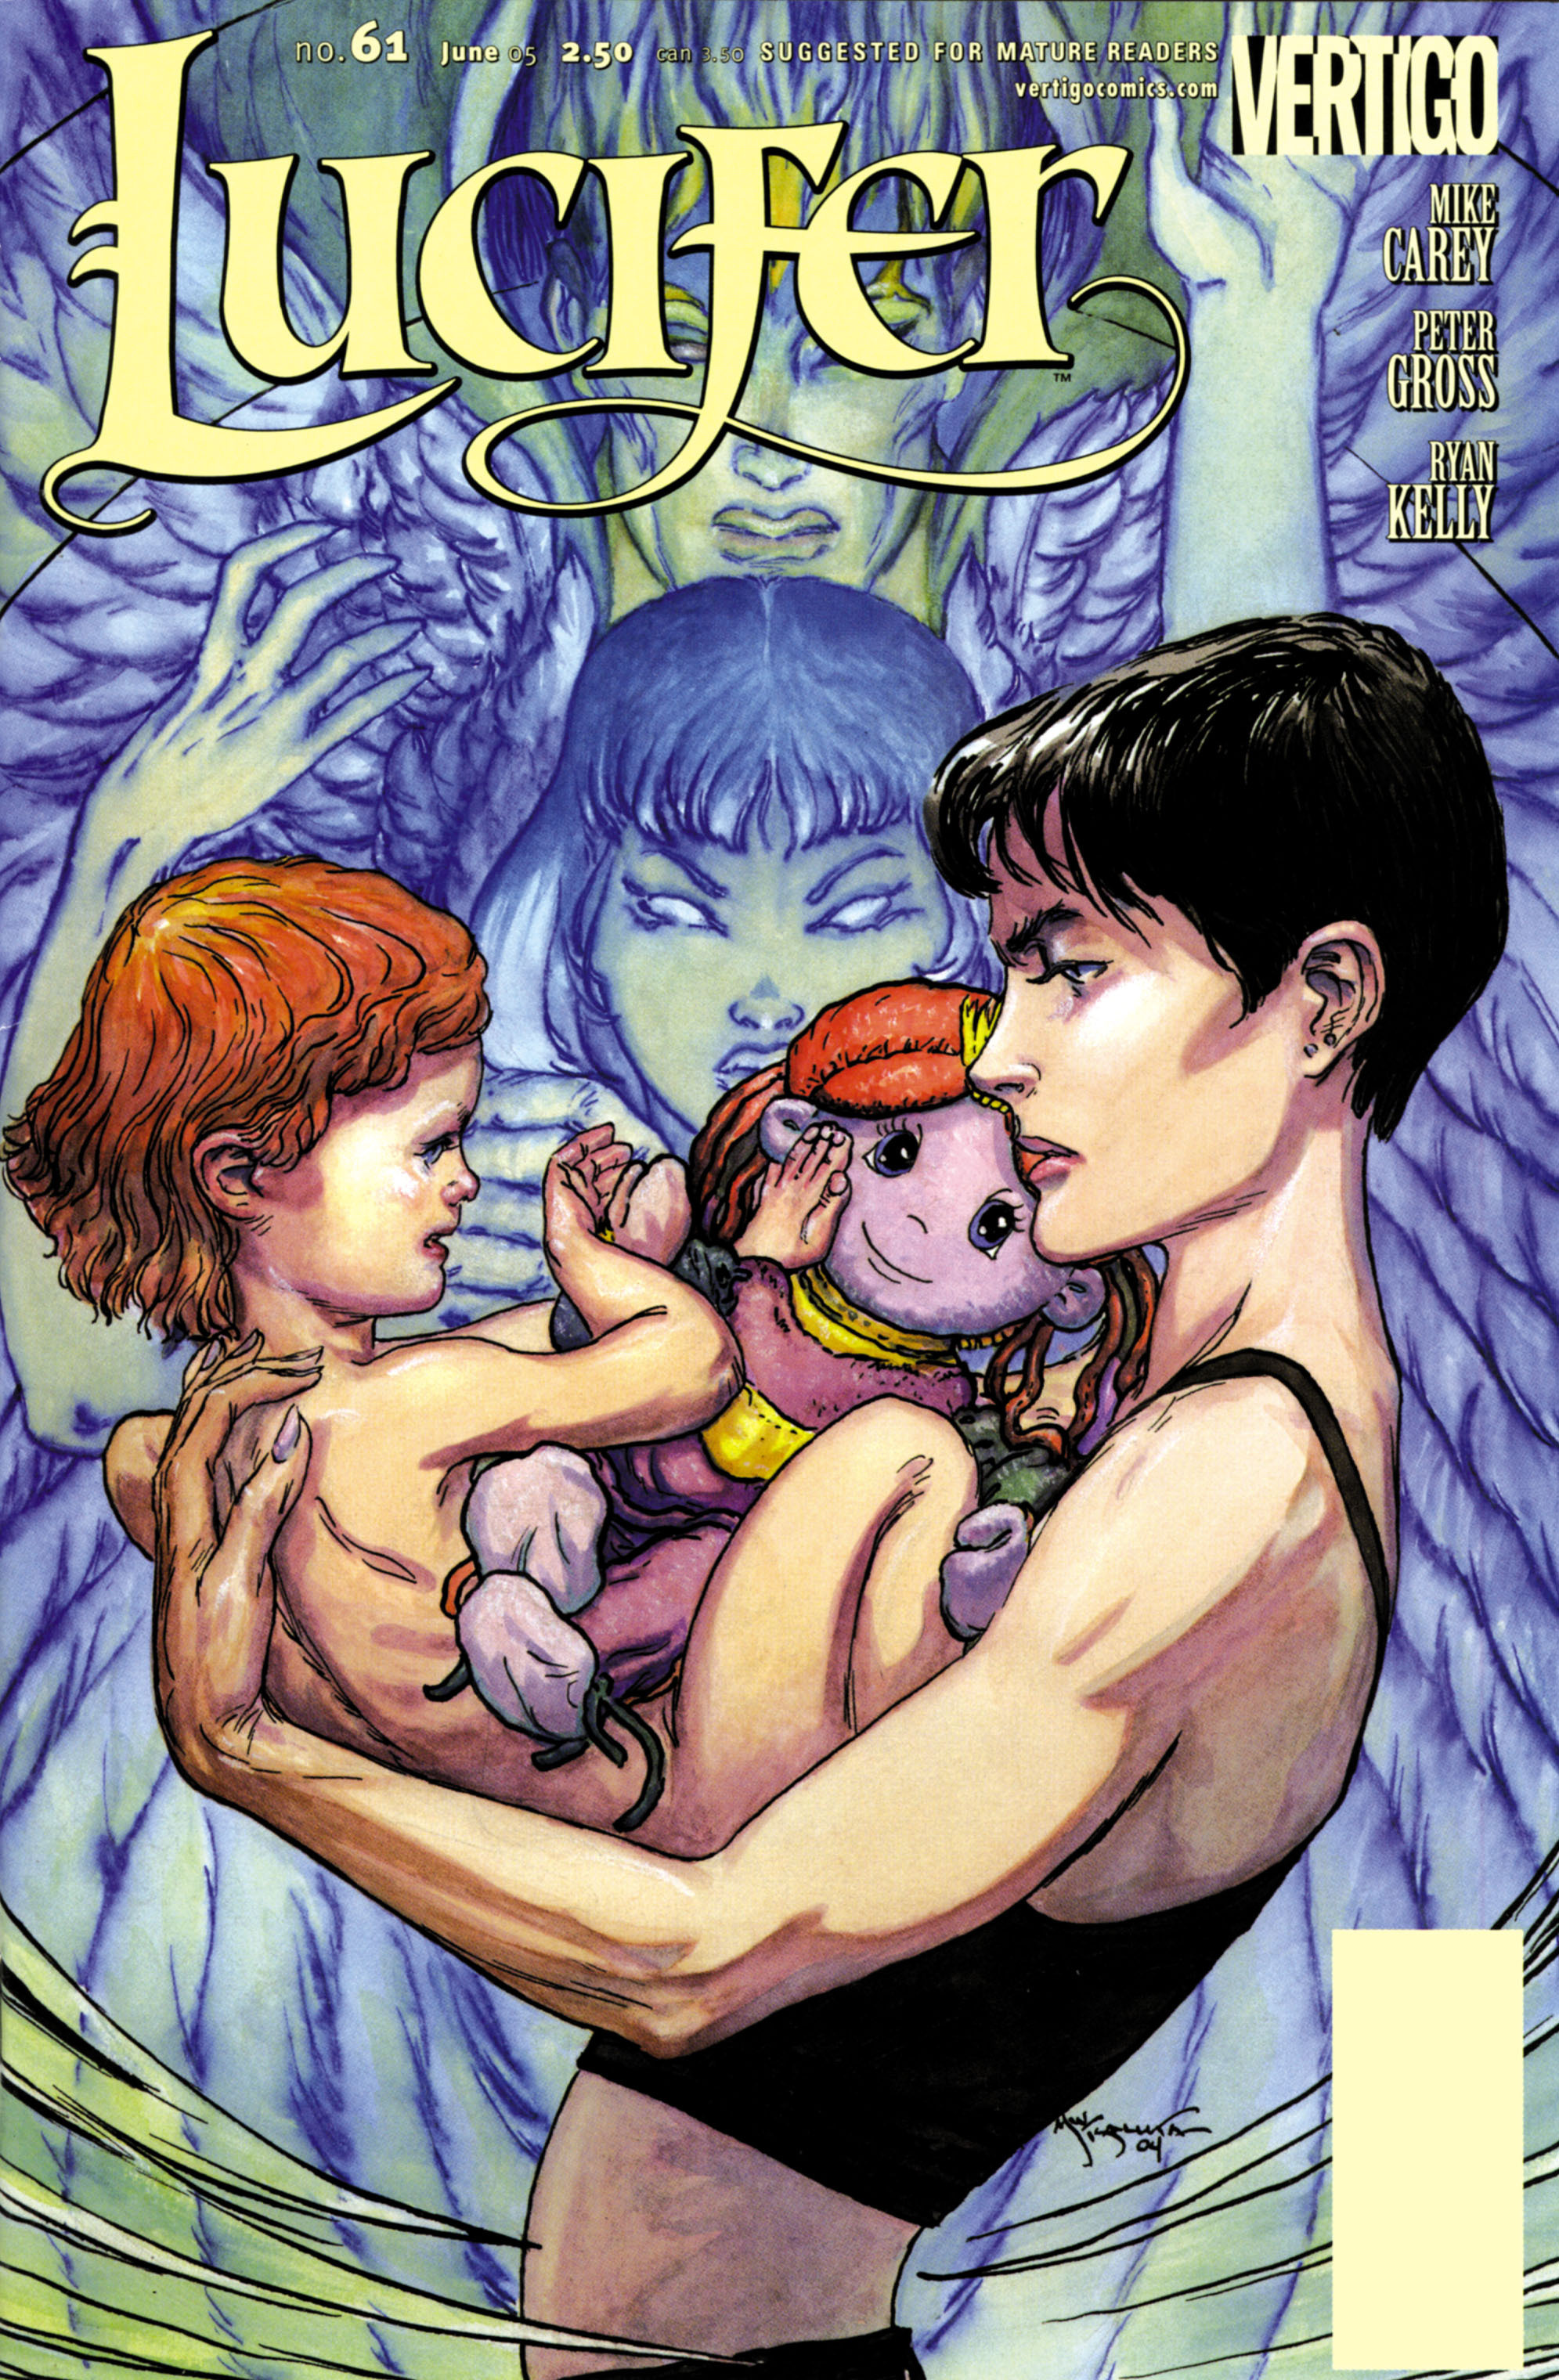 Read online Lucifer (2000) comic -  Issue #61 - 1